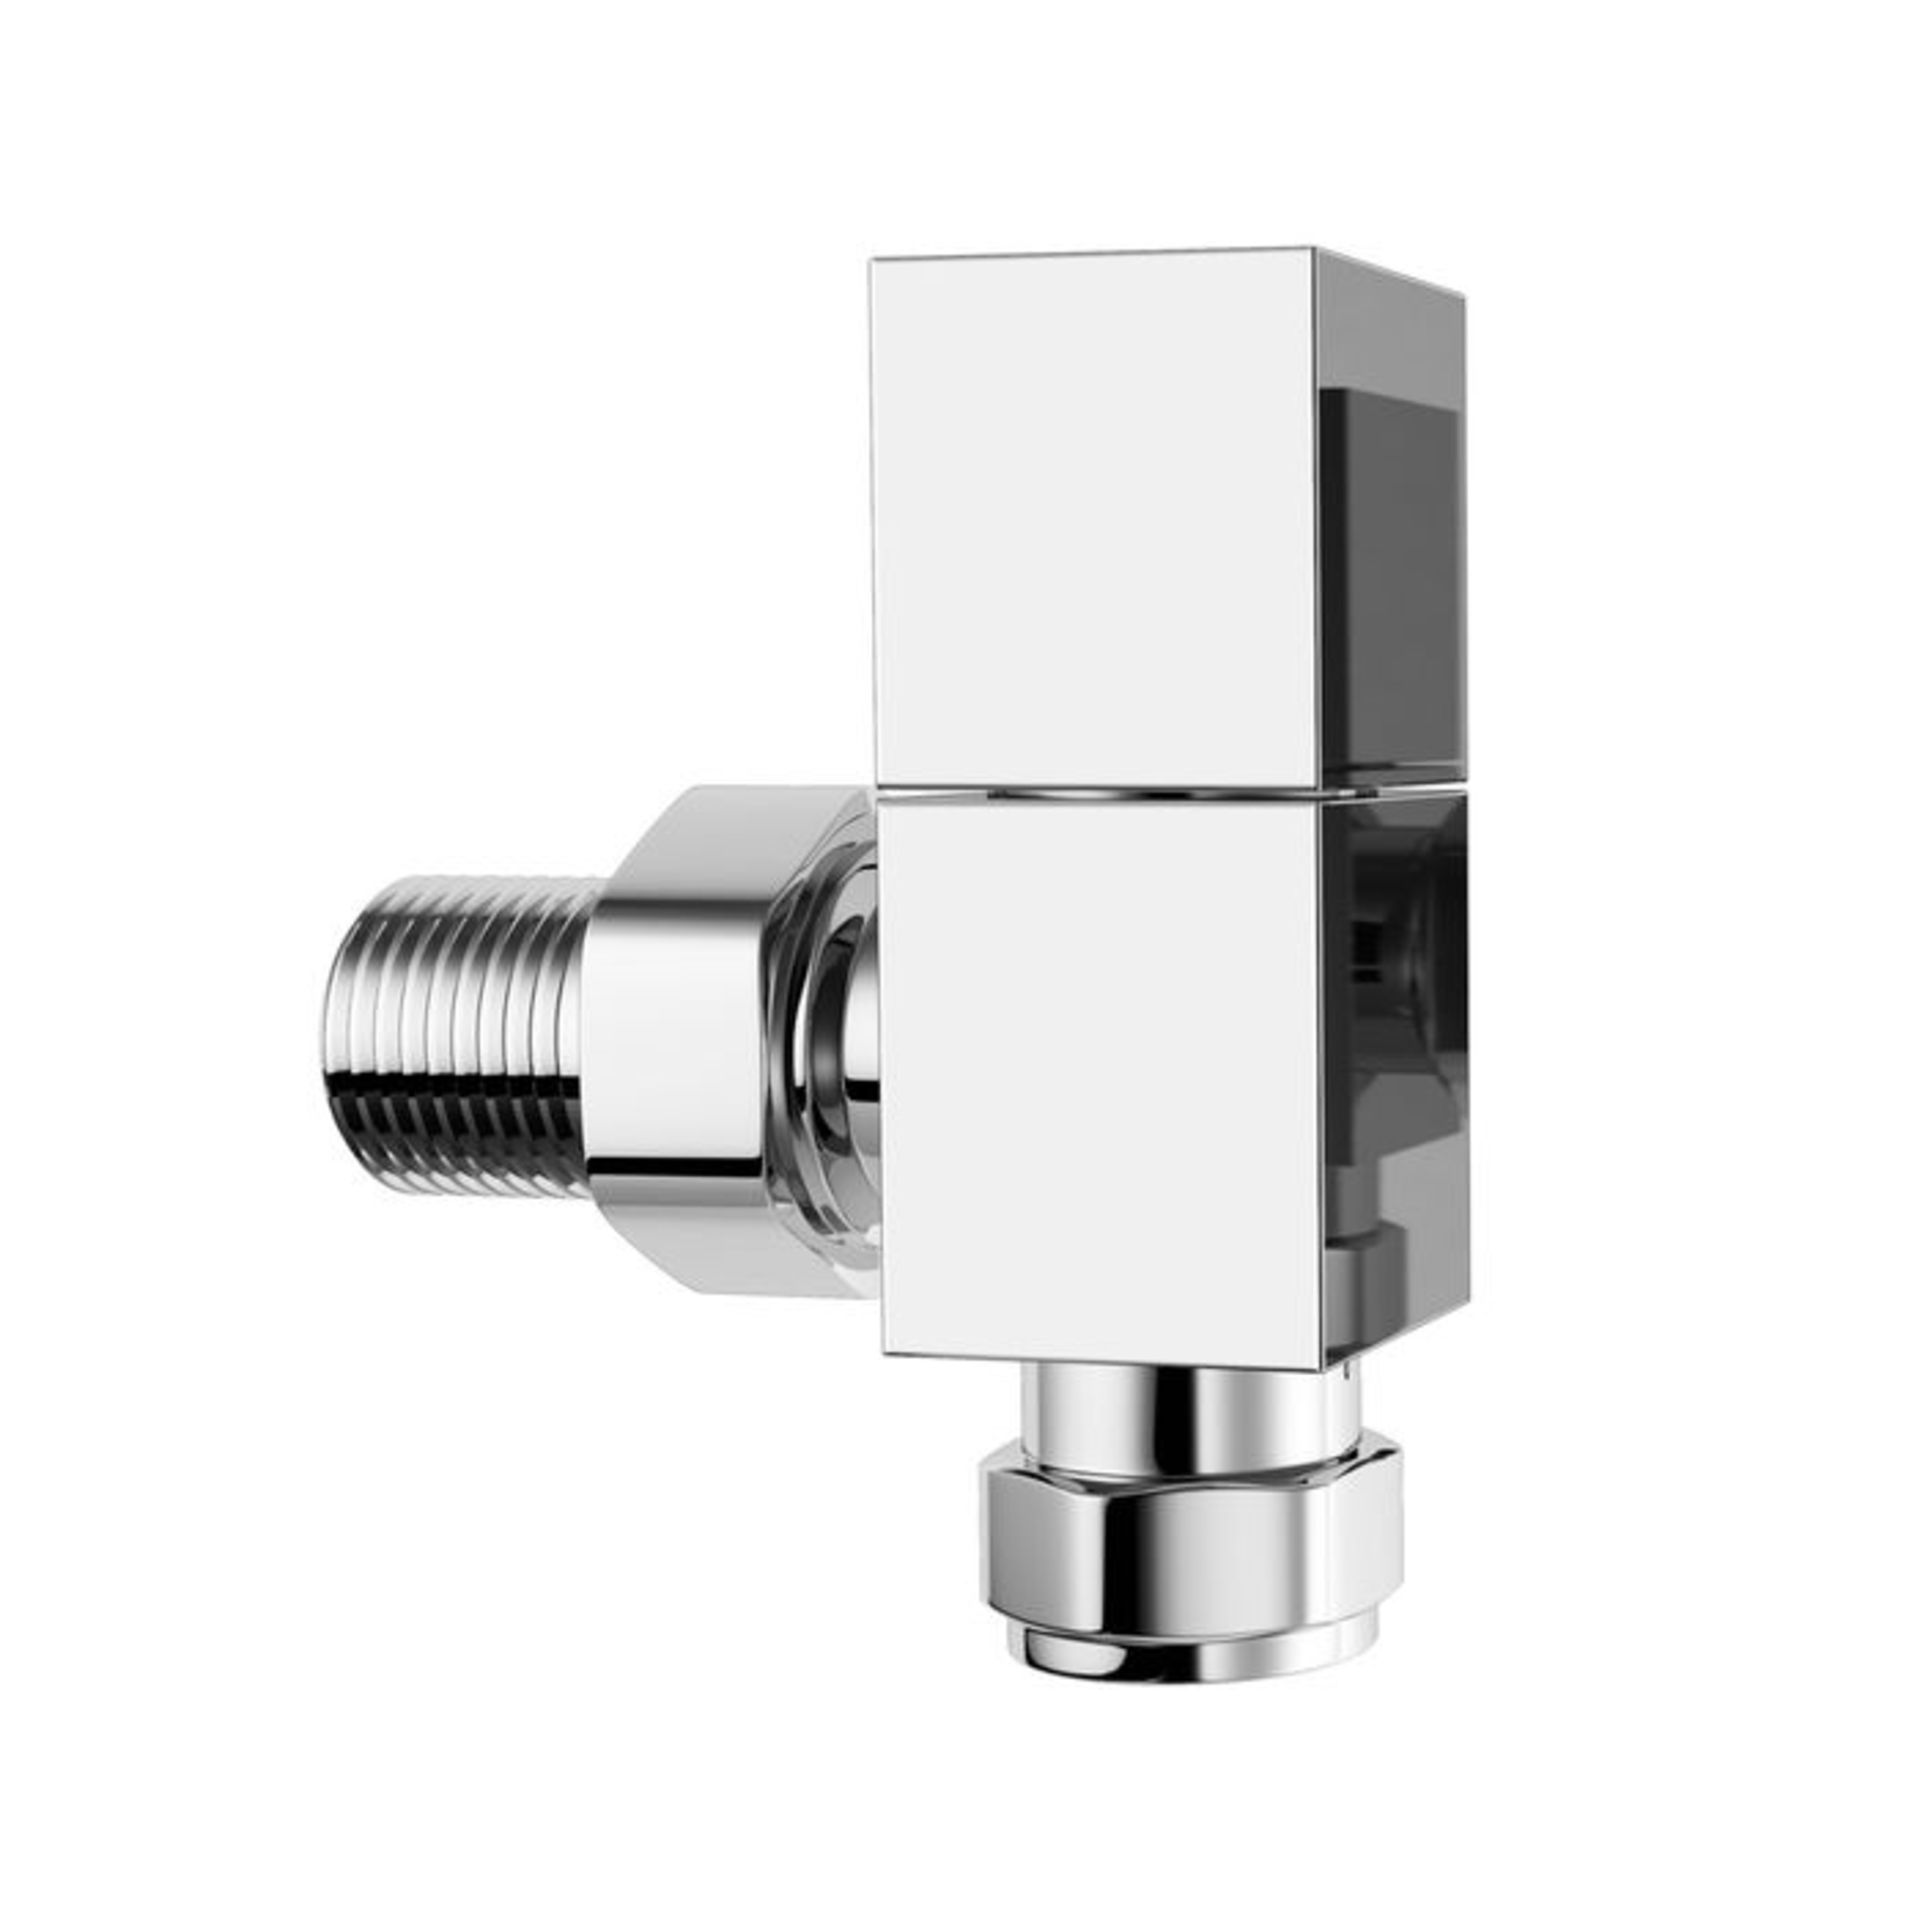 (S97) 15mm Standard Connection Square Angled Chrome Radiator Valves 100% leak tested Safety tested